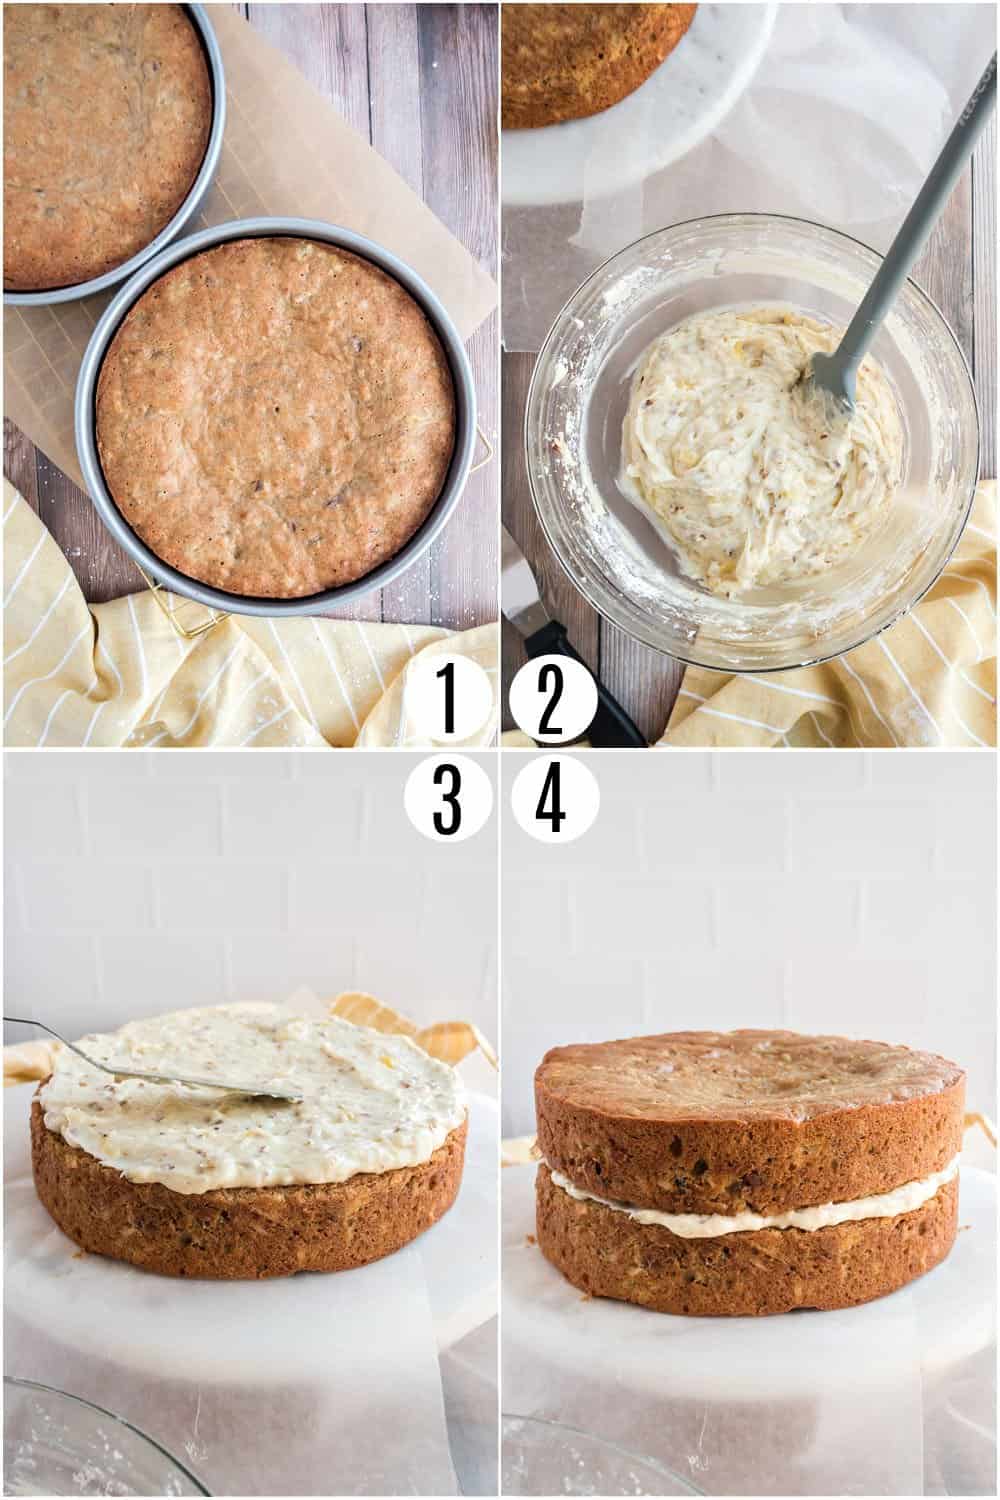 Step by step photos showing how to assemble hummingbird cake with frosting.